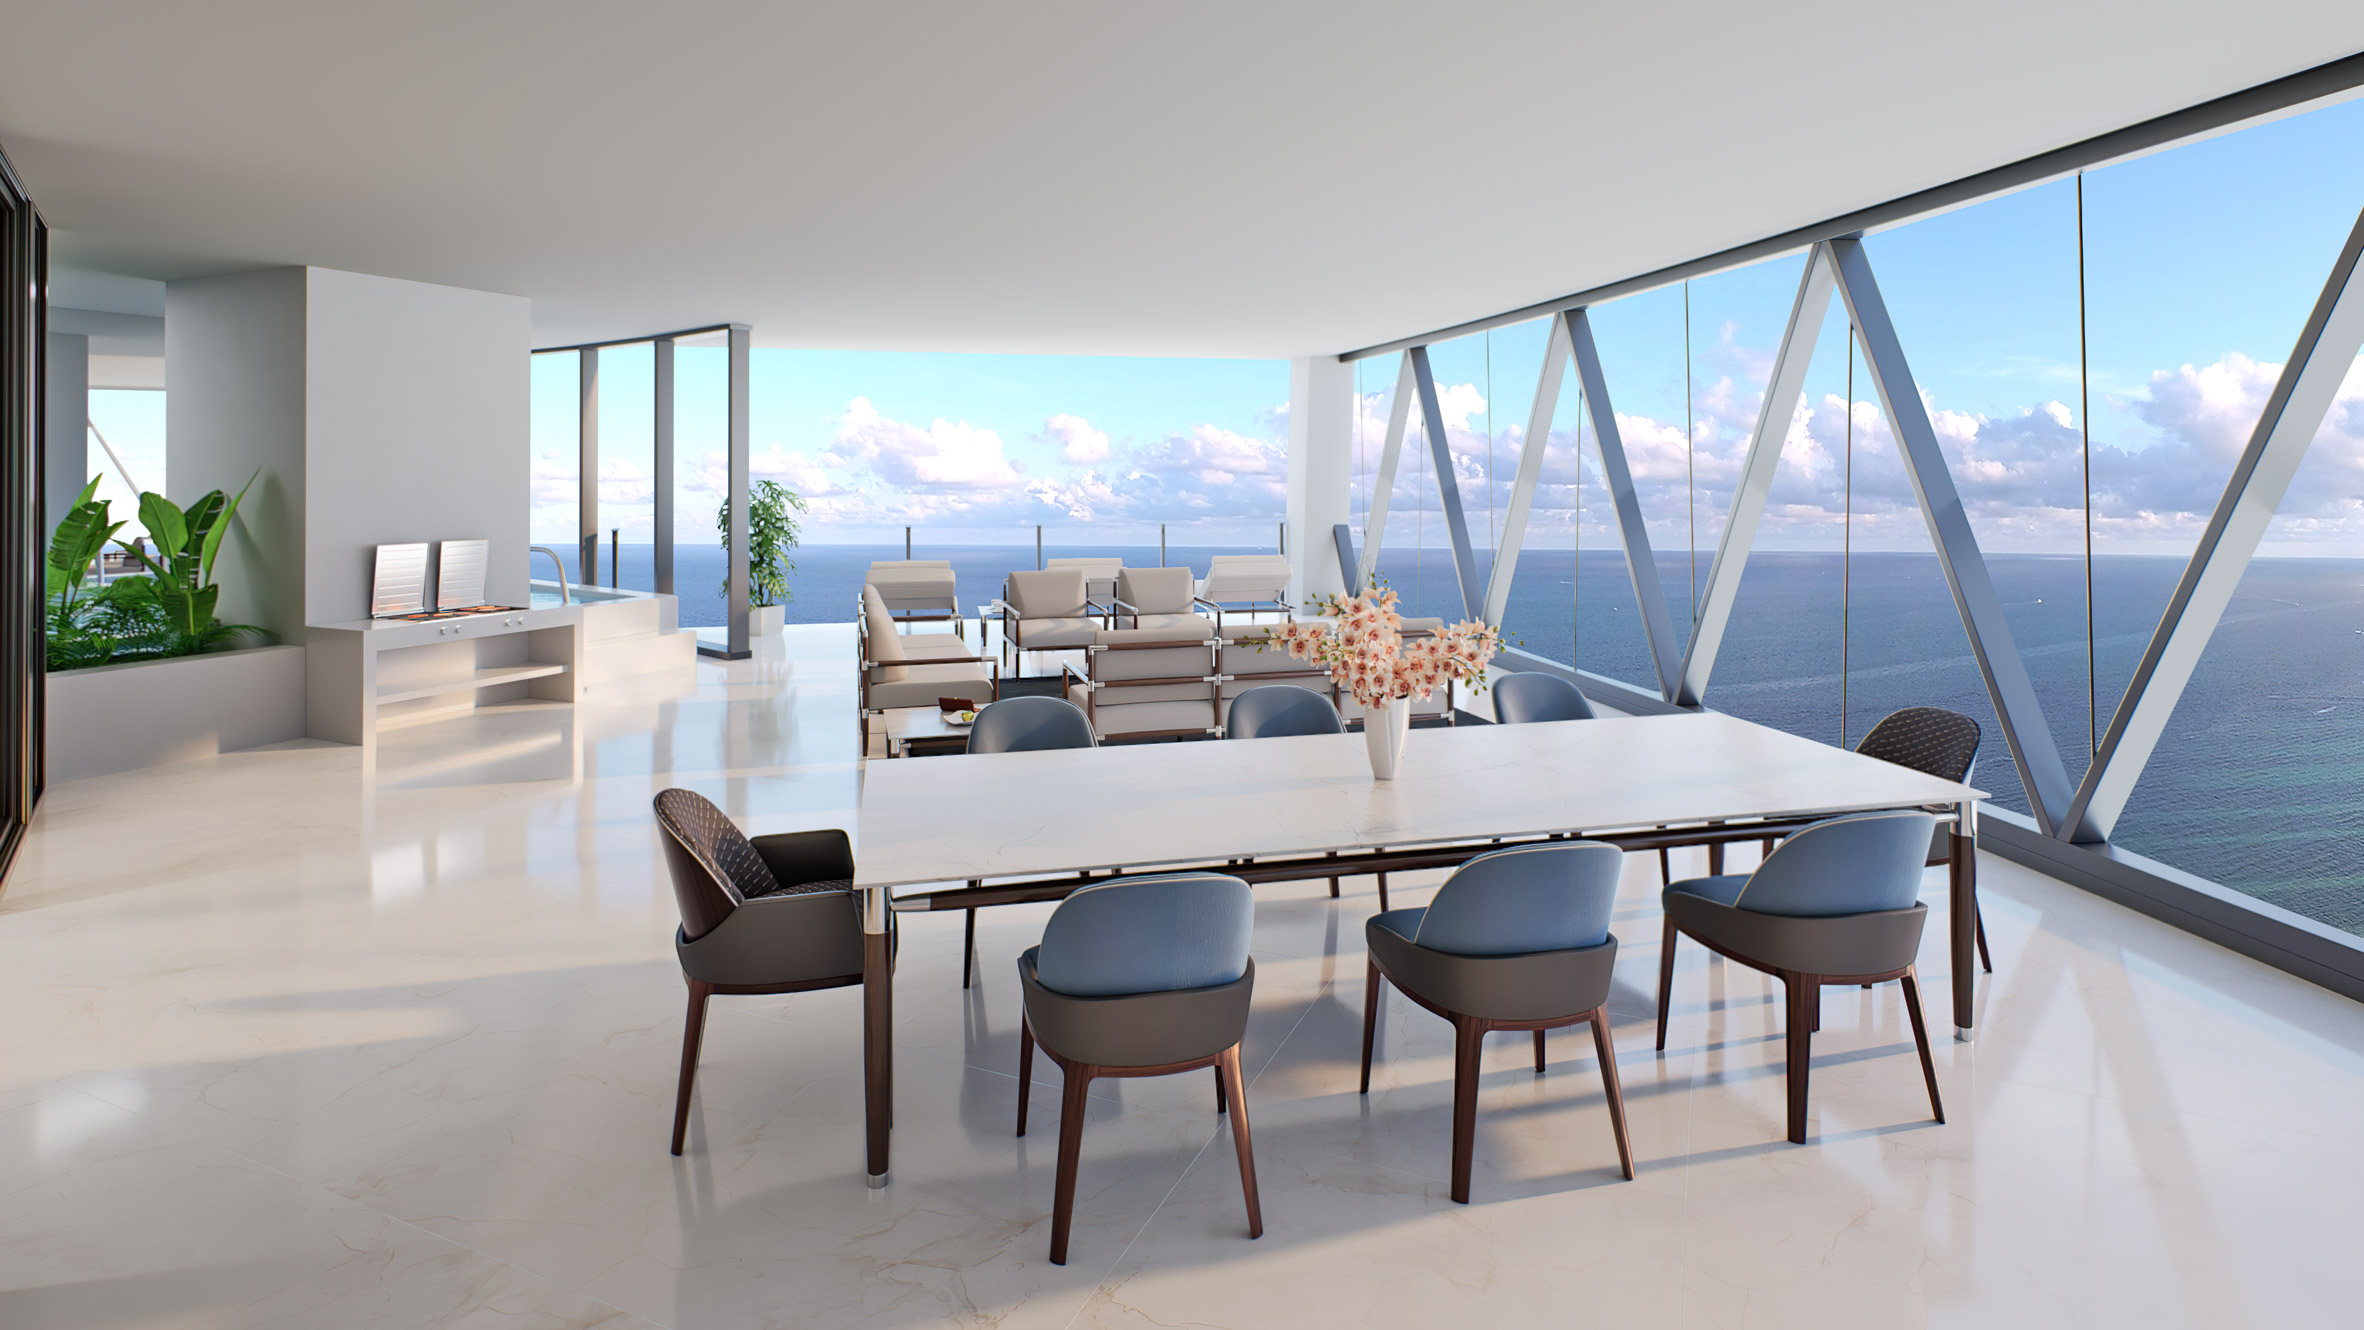 Inside the Bentley Residences tower